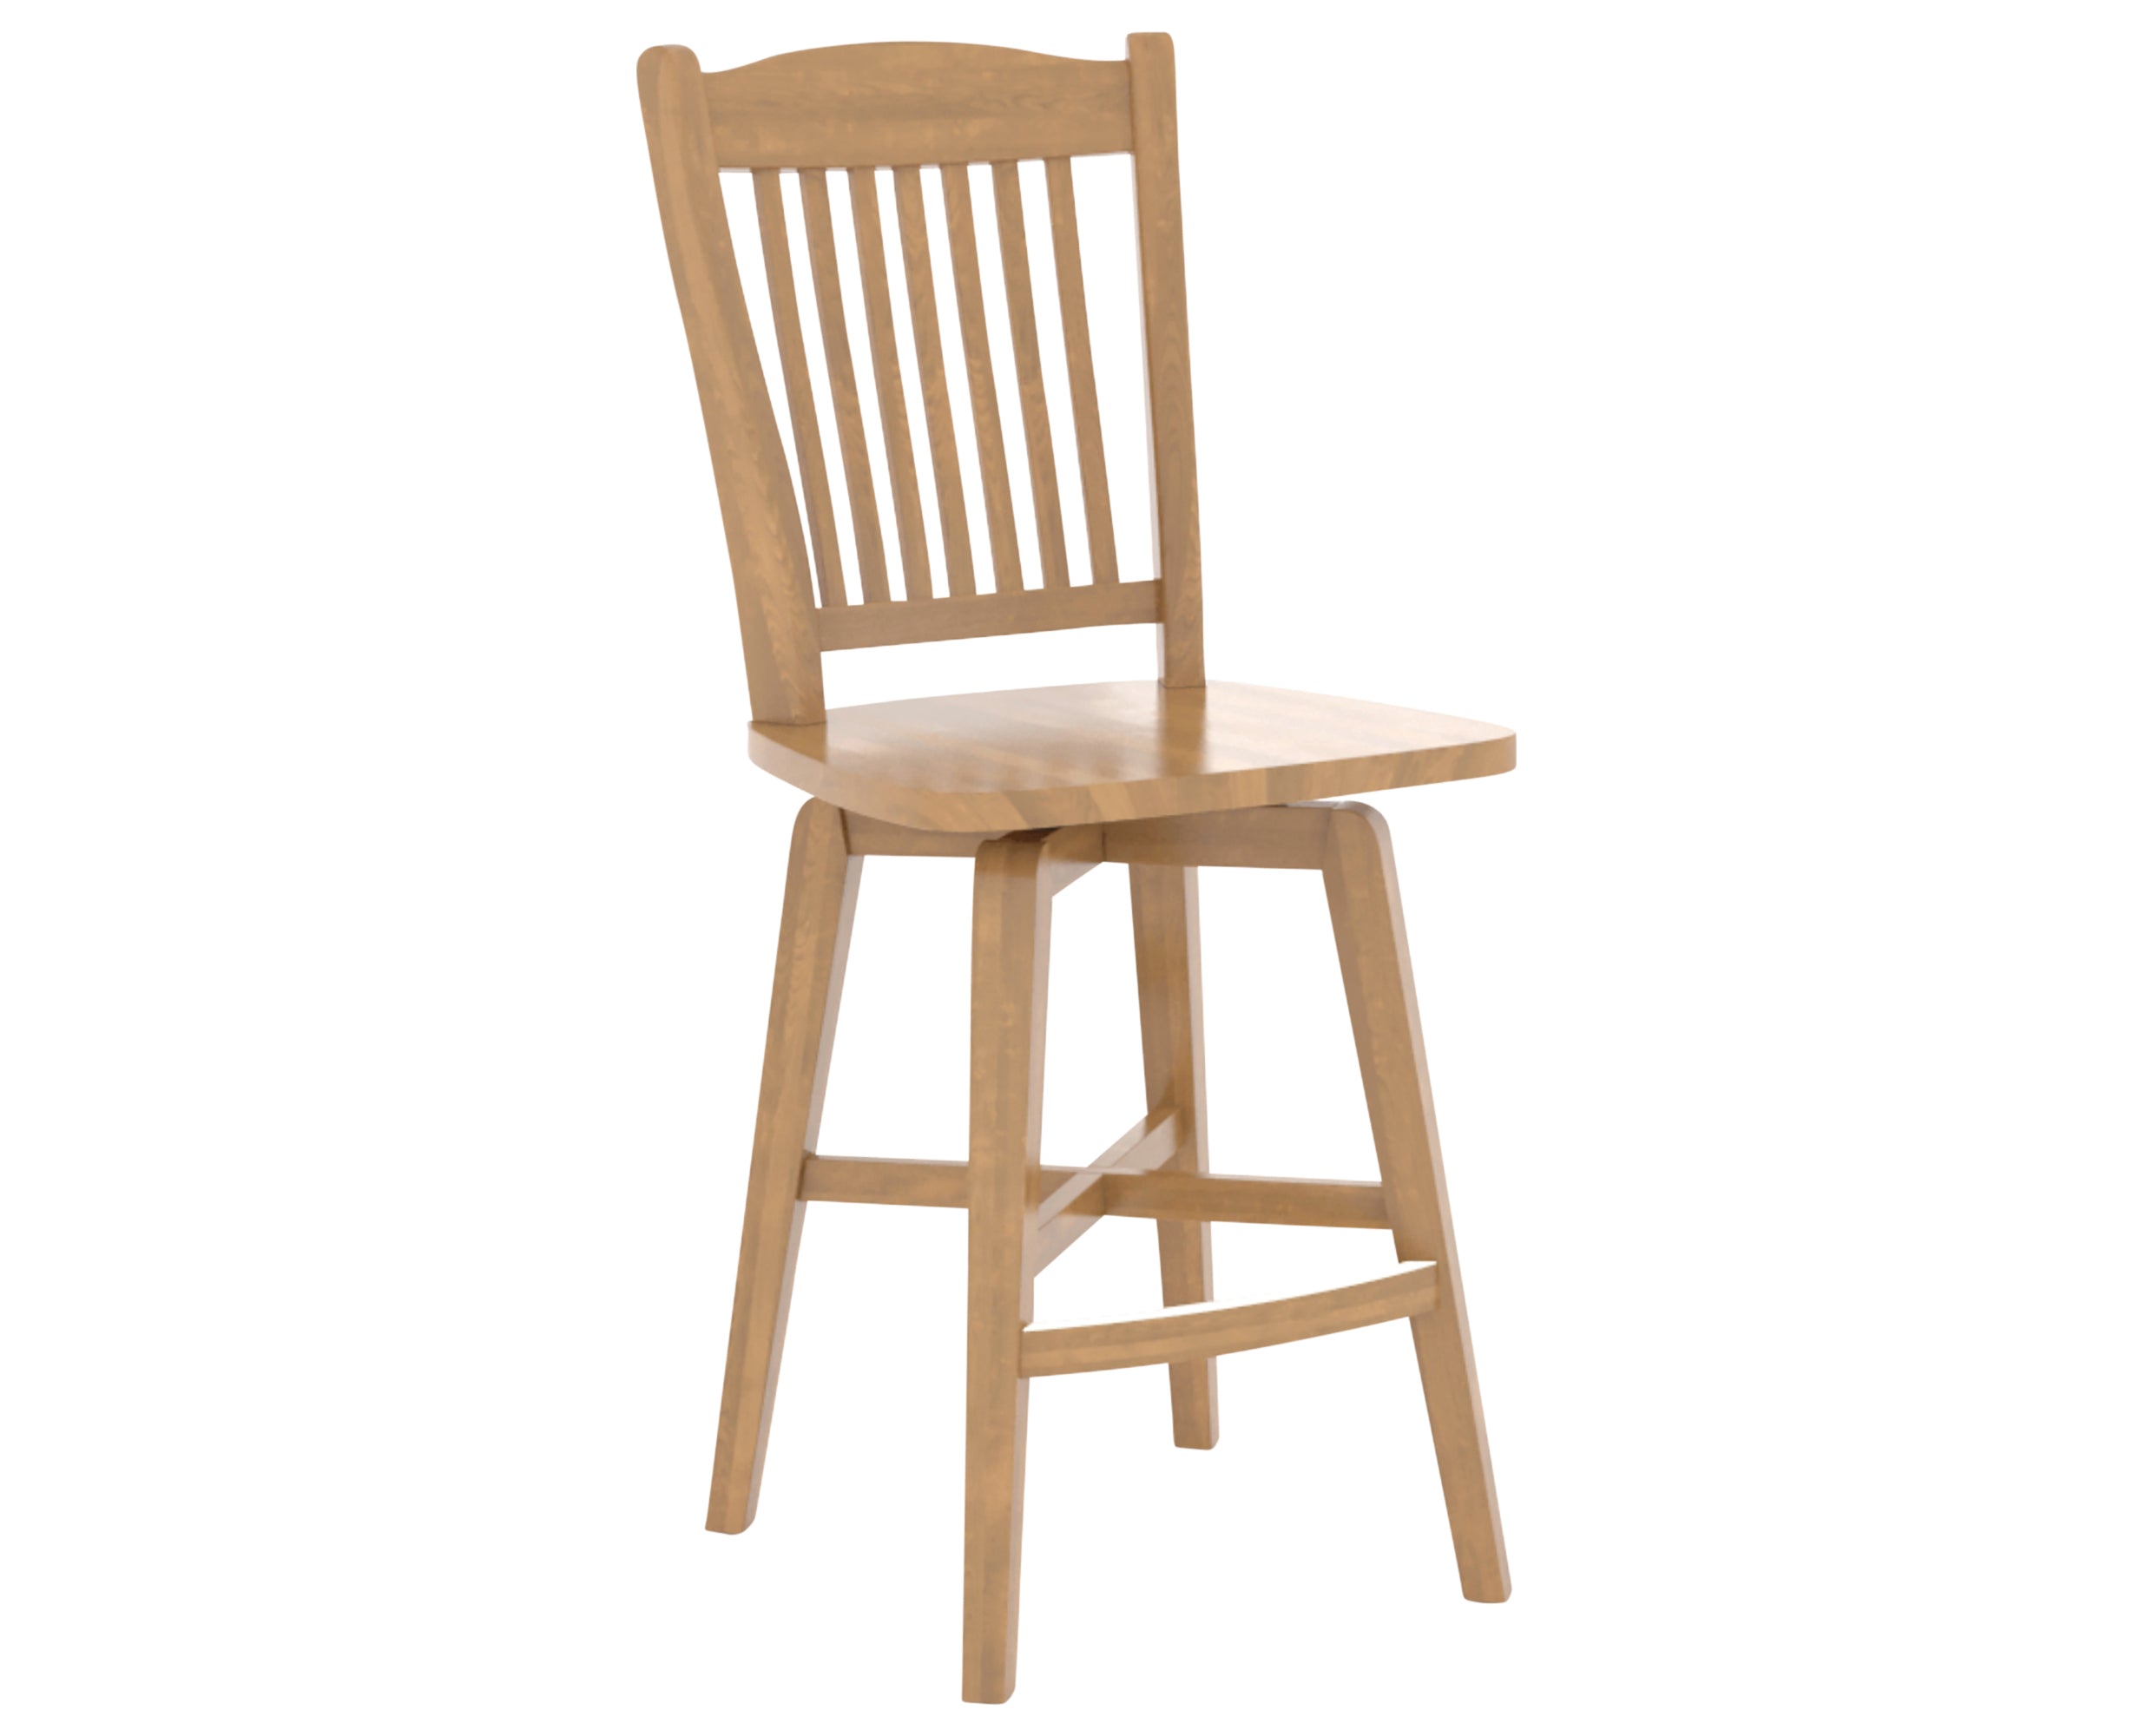 Honey Washed | Canadel Core Counter Stool 7232 | Valley Ridge Furniture